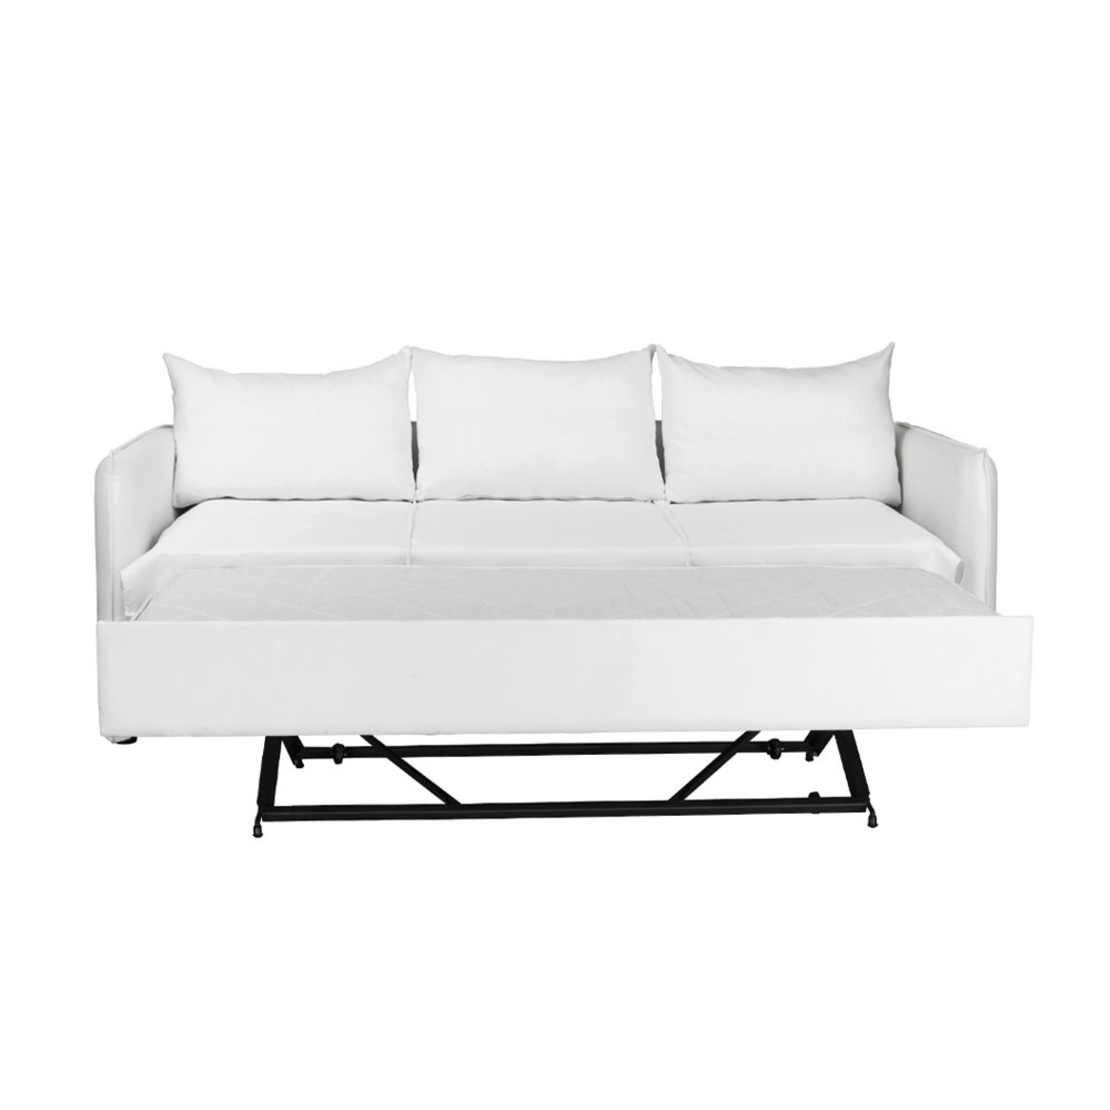 ISLAND SOFA 3SEAT REMOVABLE COVER WITH MECHANISM A